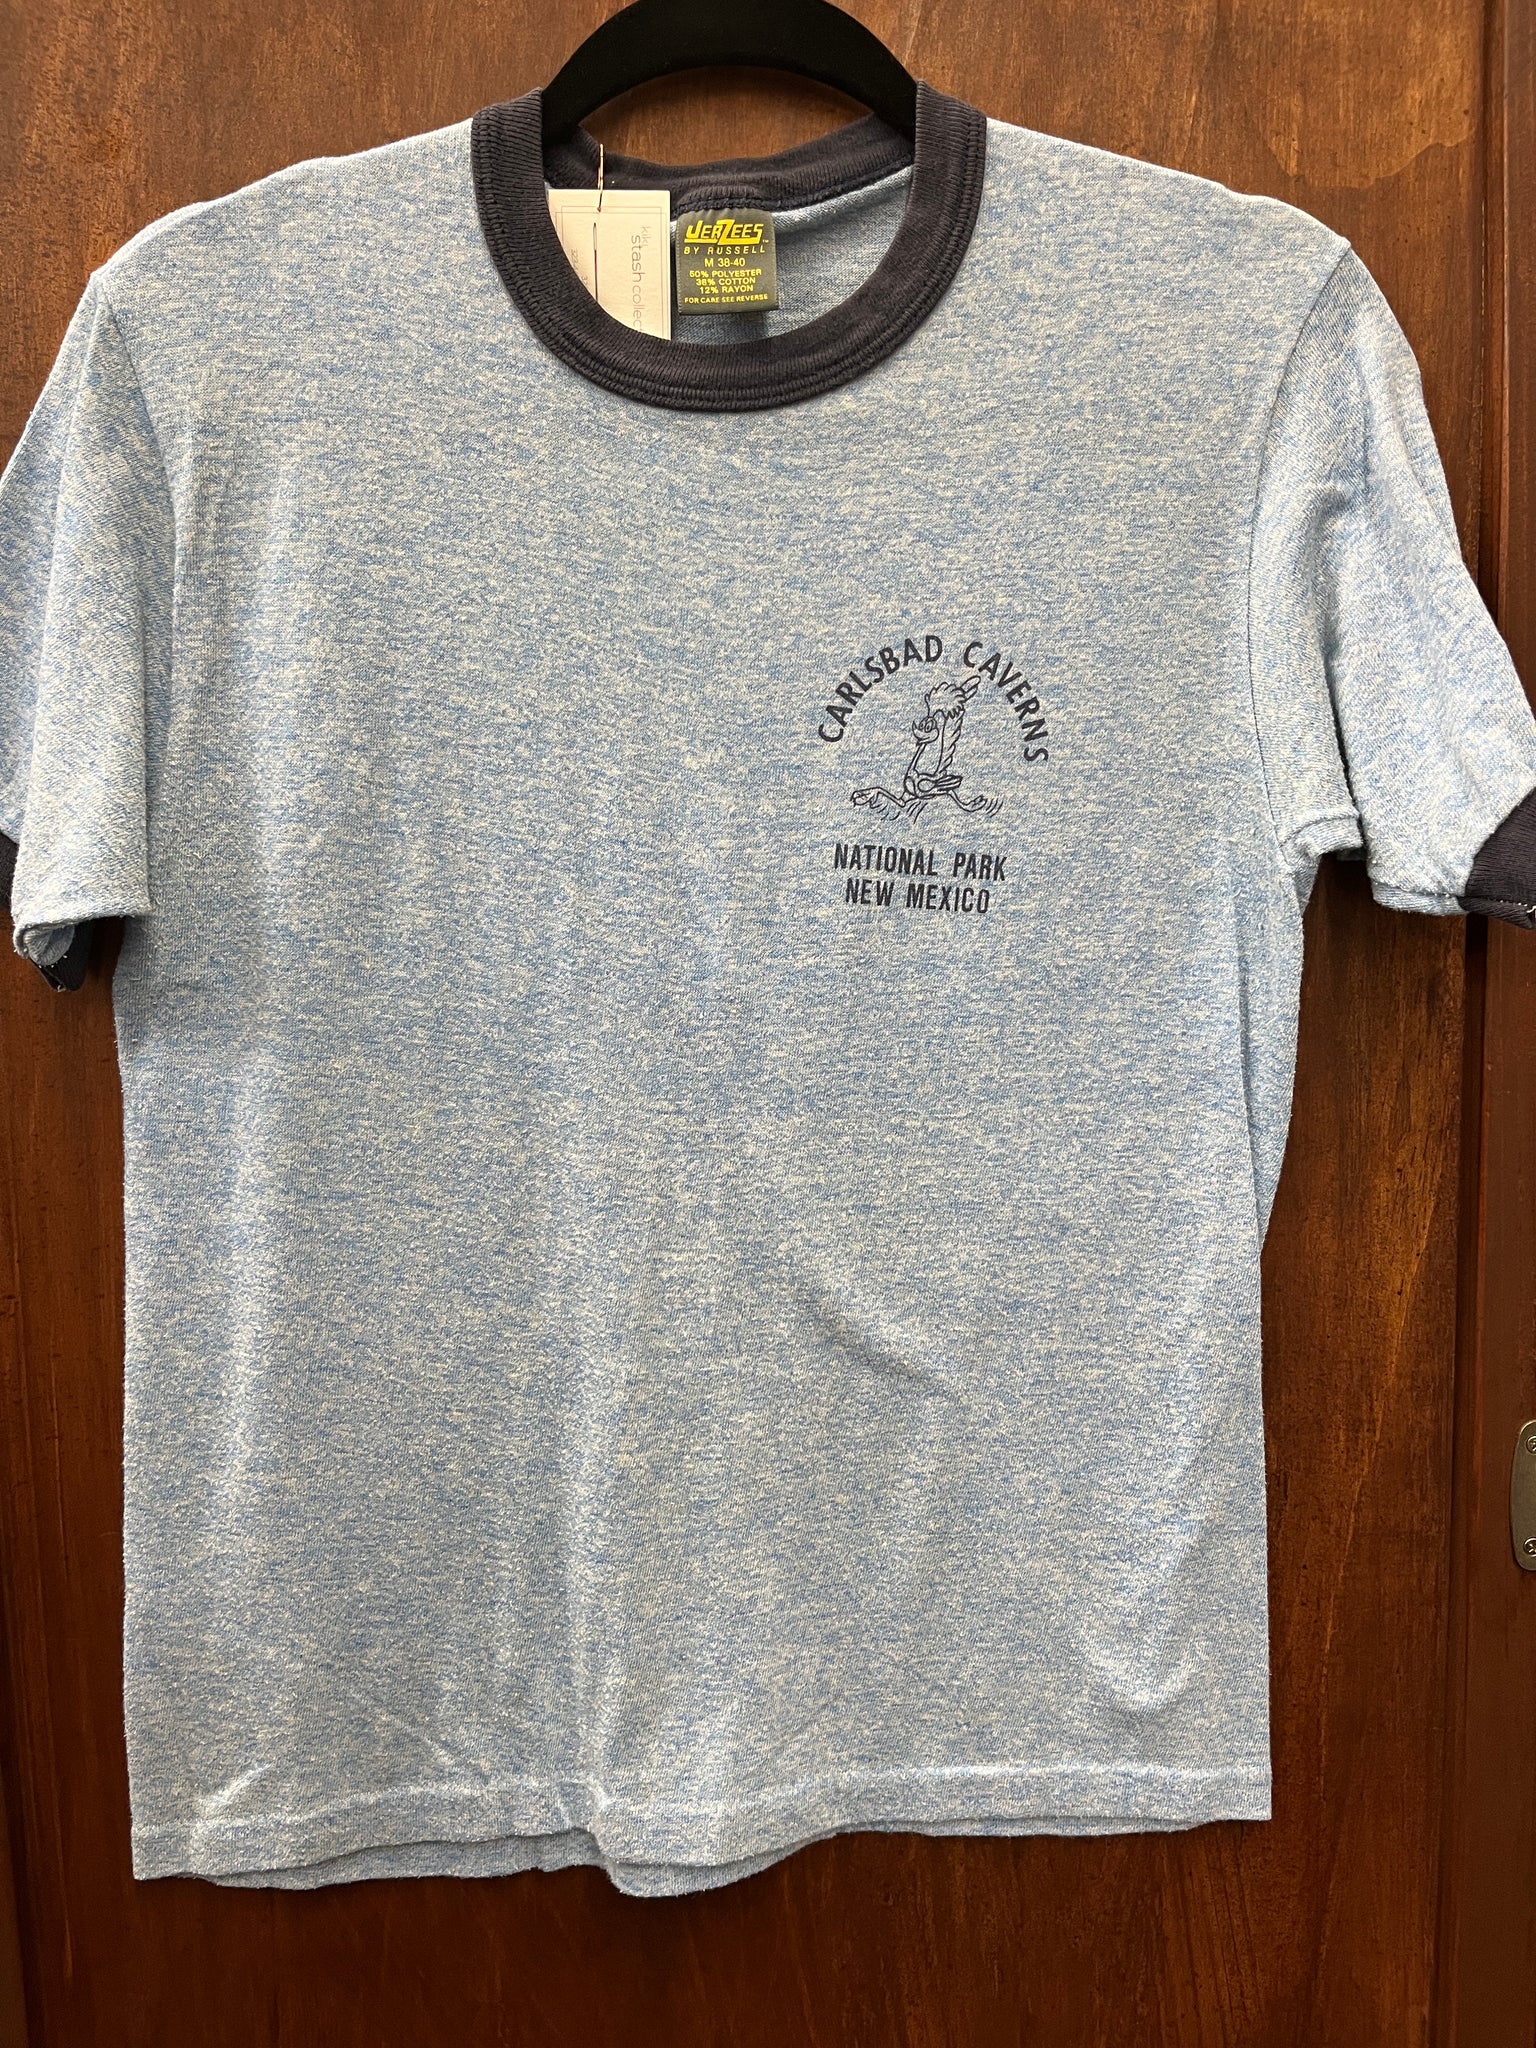 1970s TSHIRT-ringer tee-Jersee's Carlsbad Caverns-heather blue